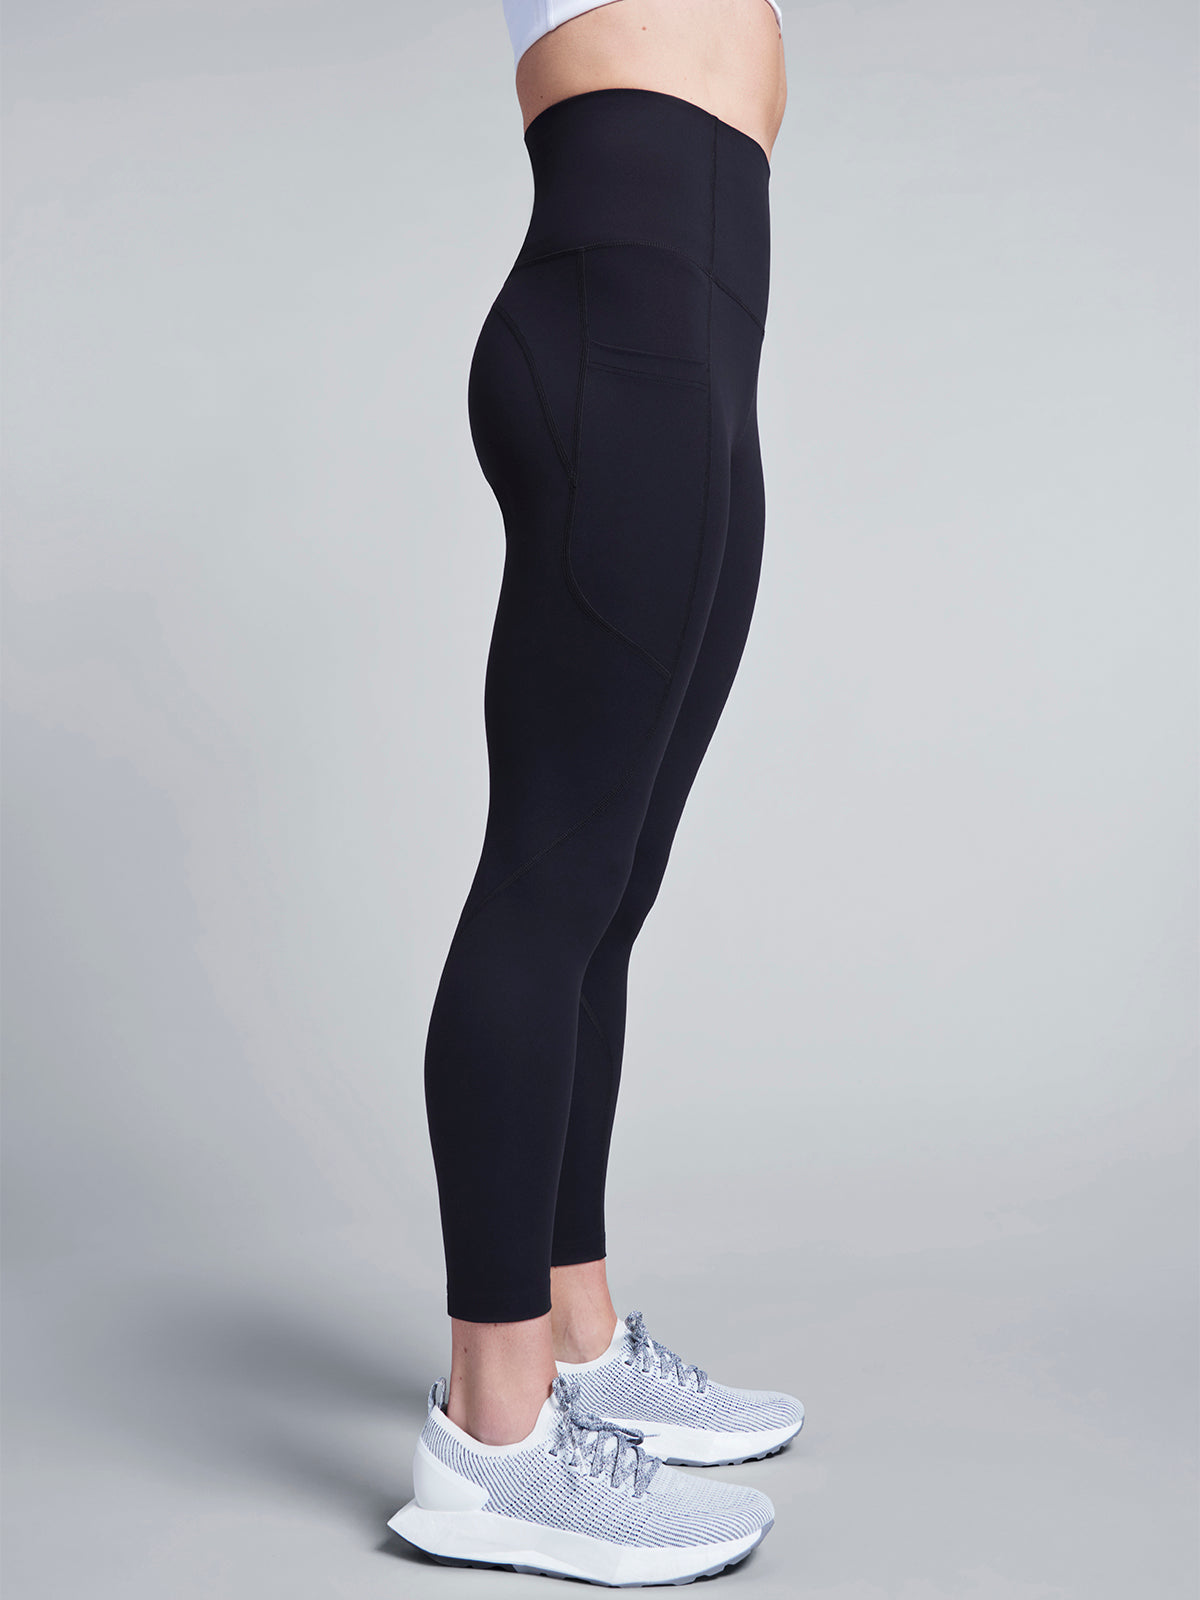 Soft Touch Sculpting Hold Leggings Black, High-Waisted